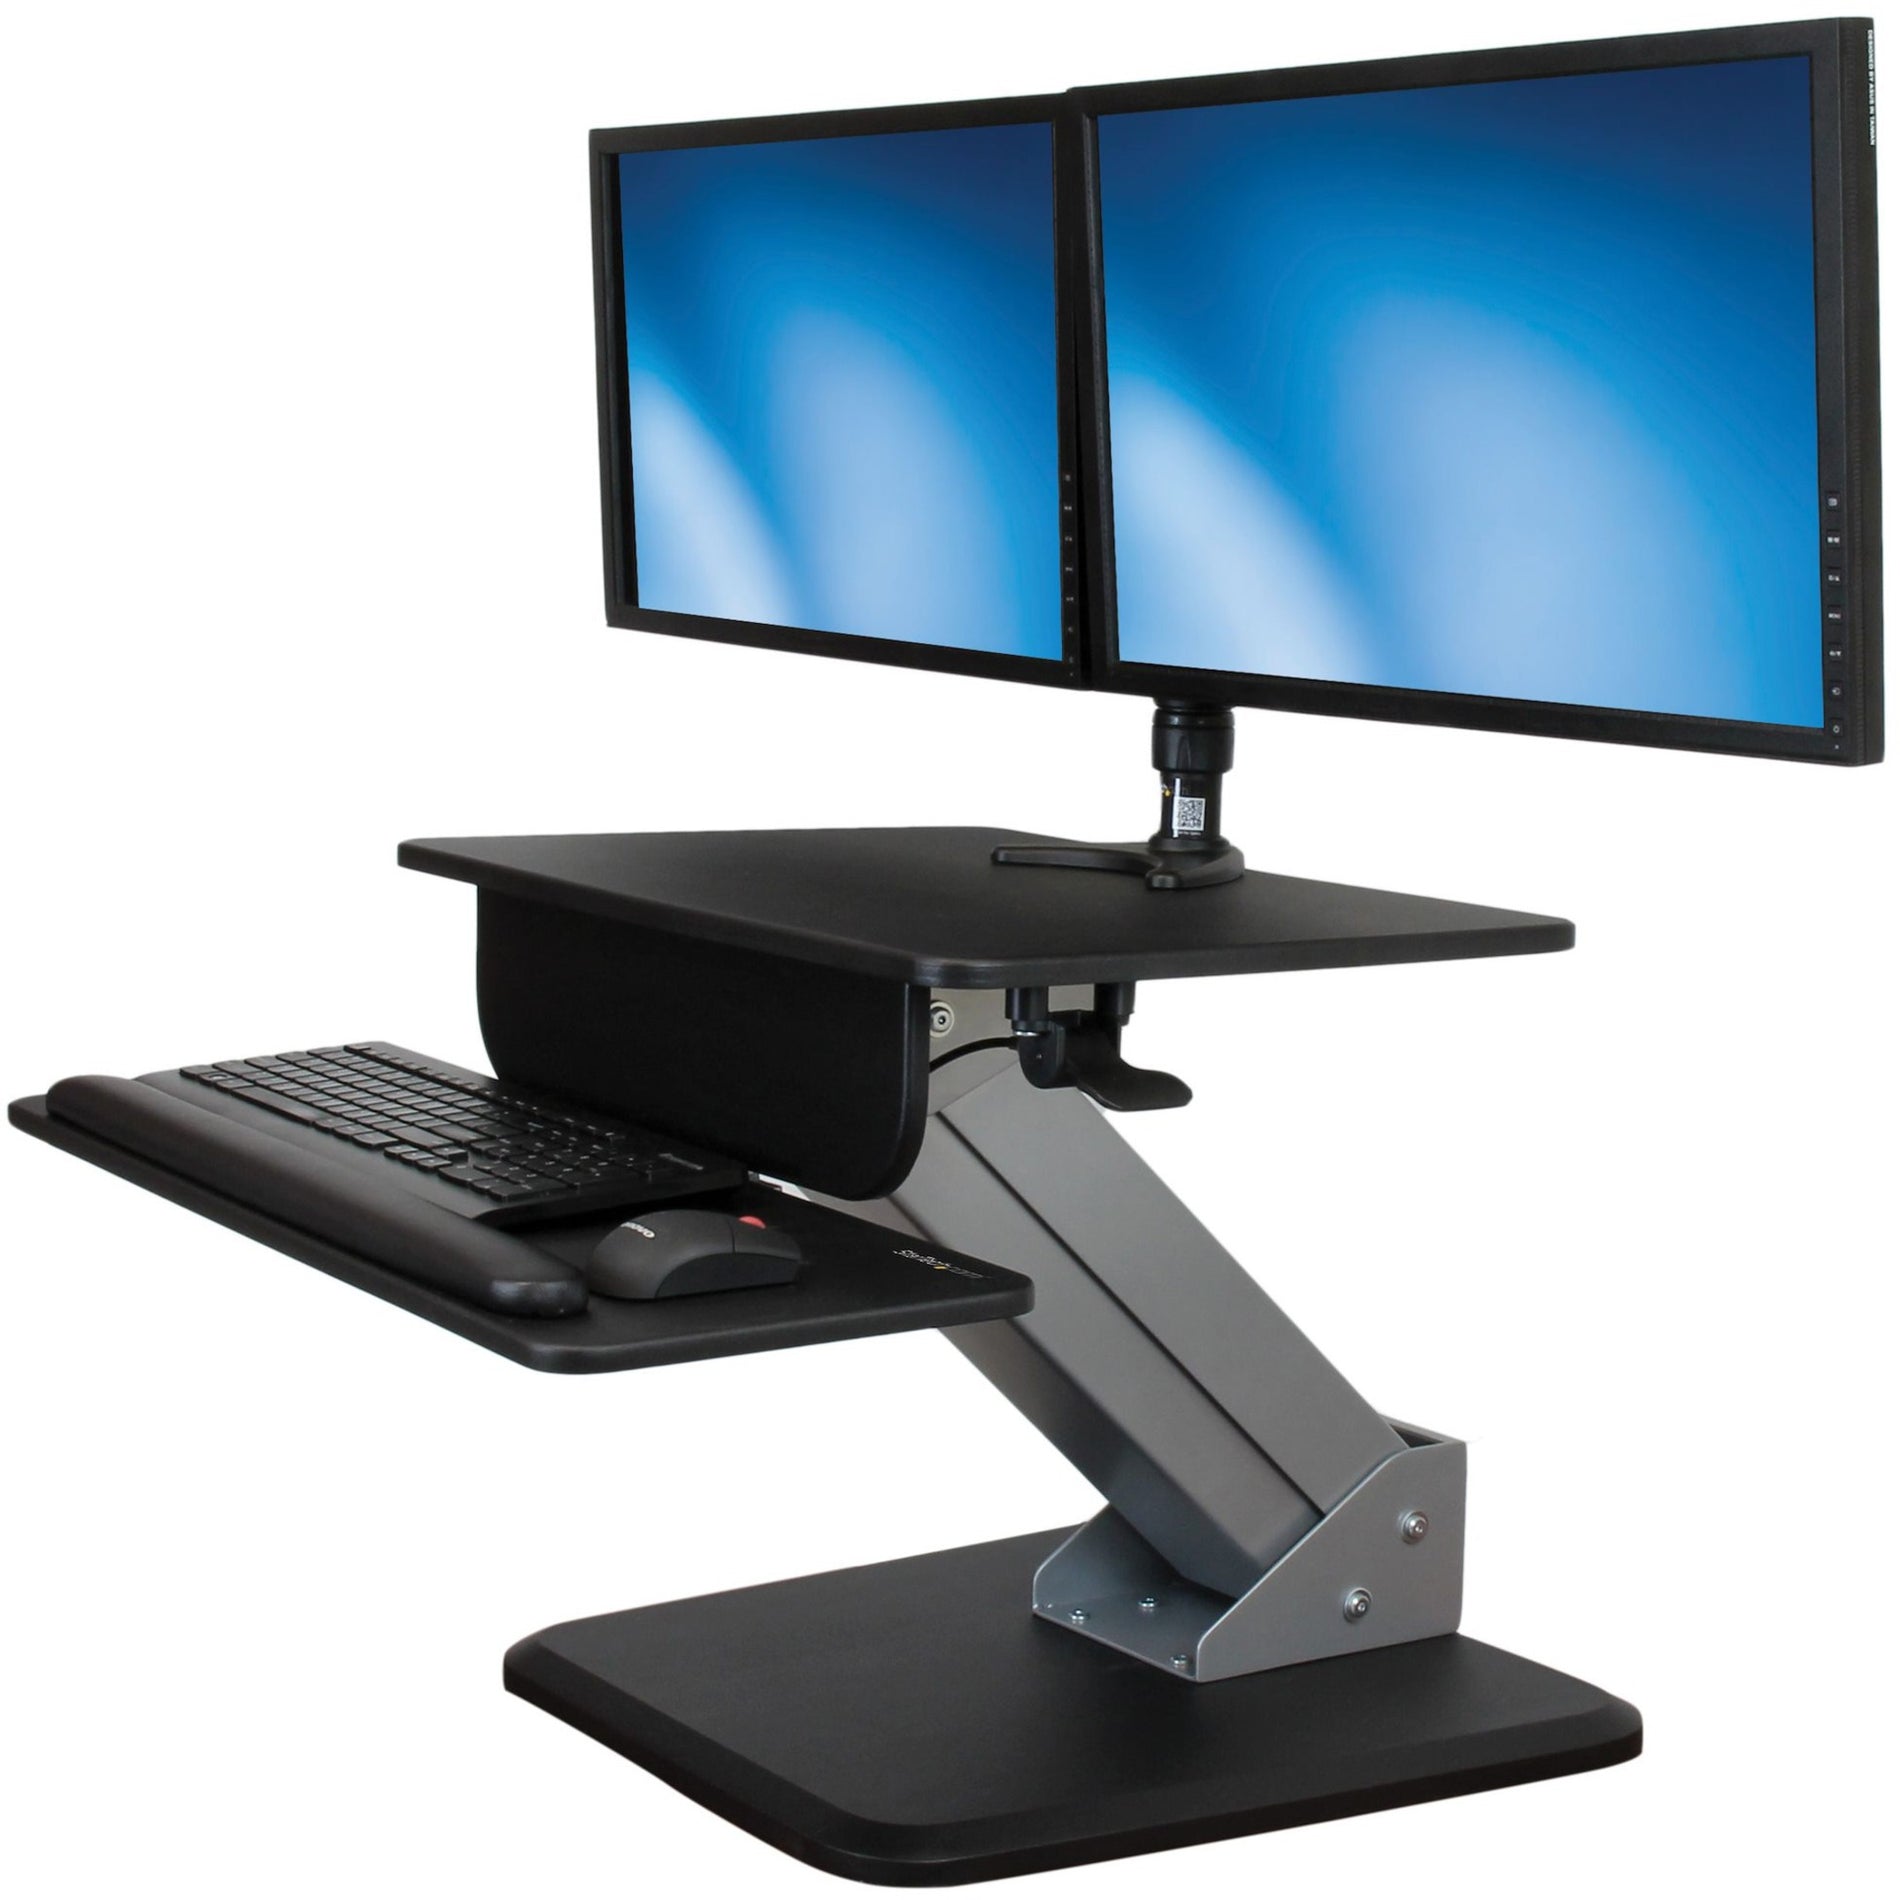 StarTech.com BNDSTSDUAL Dual Monitor Sit-to-stand Workstation - One-Touch Height Adjustment, Pan, Tilt, Swivel, Rotation, Keyboard Tray, Compact, Ergonomic